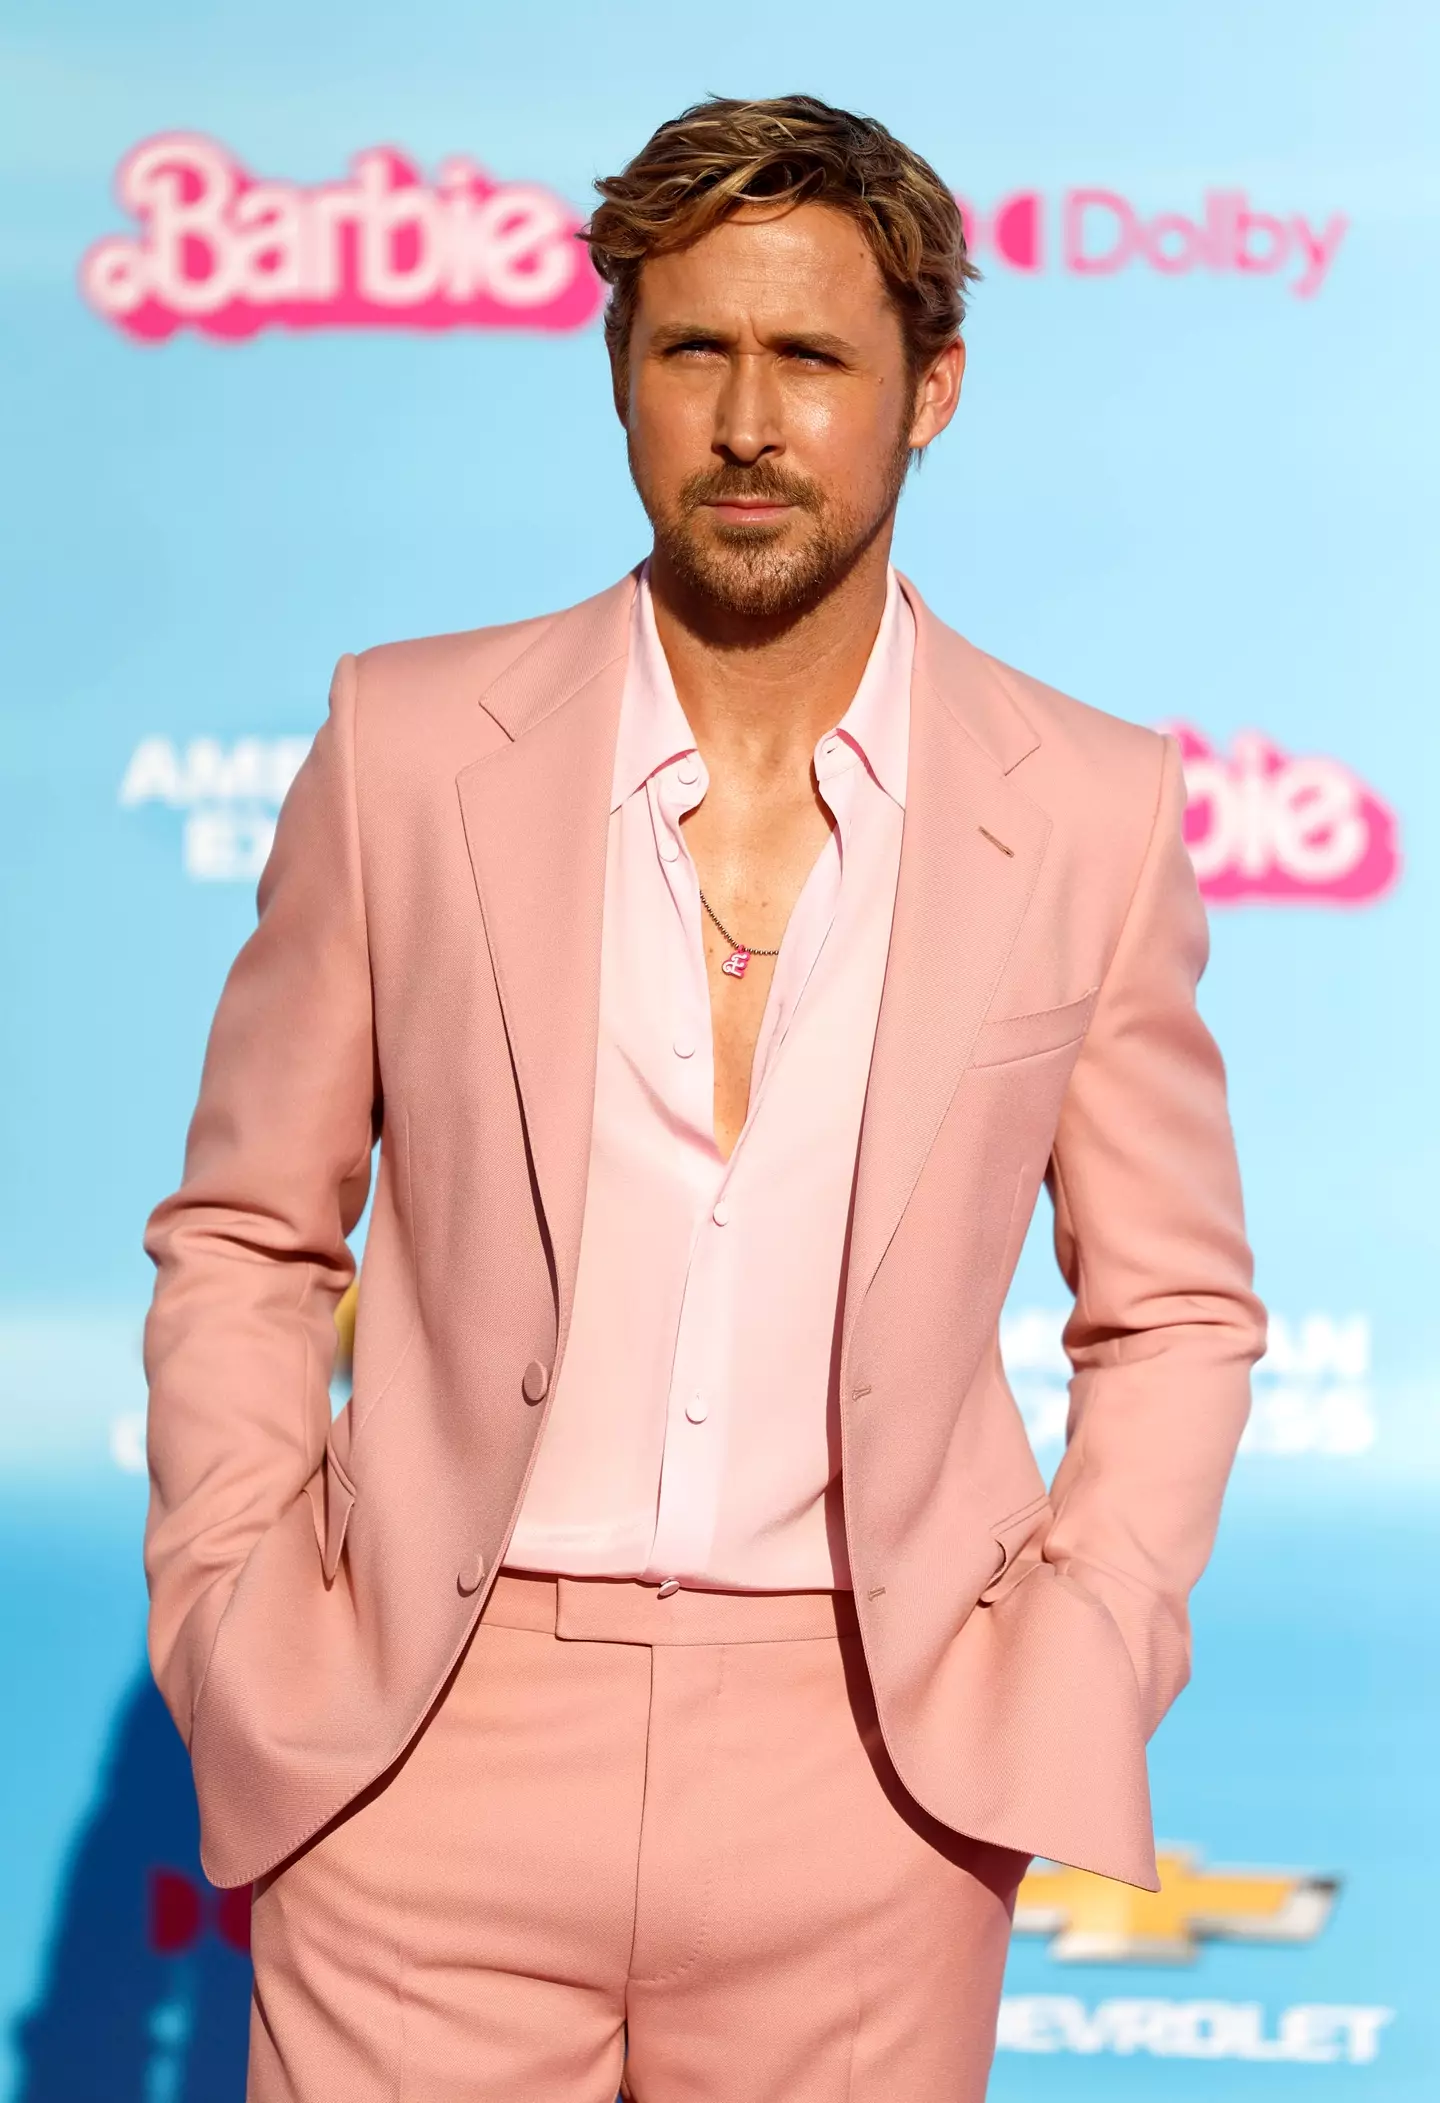 Gosling wore a pink Gucci suit and chain necklace.